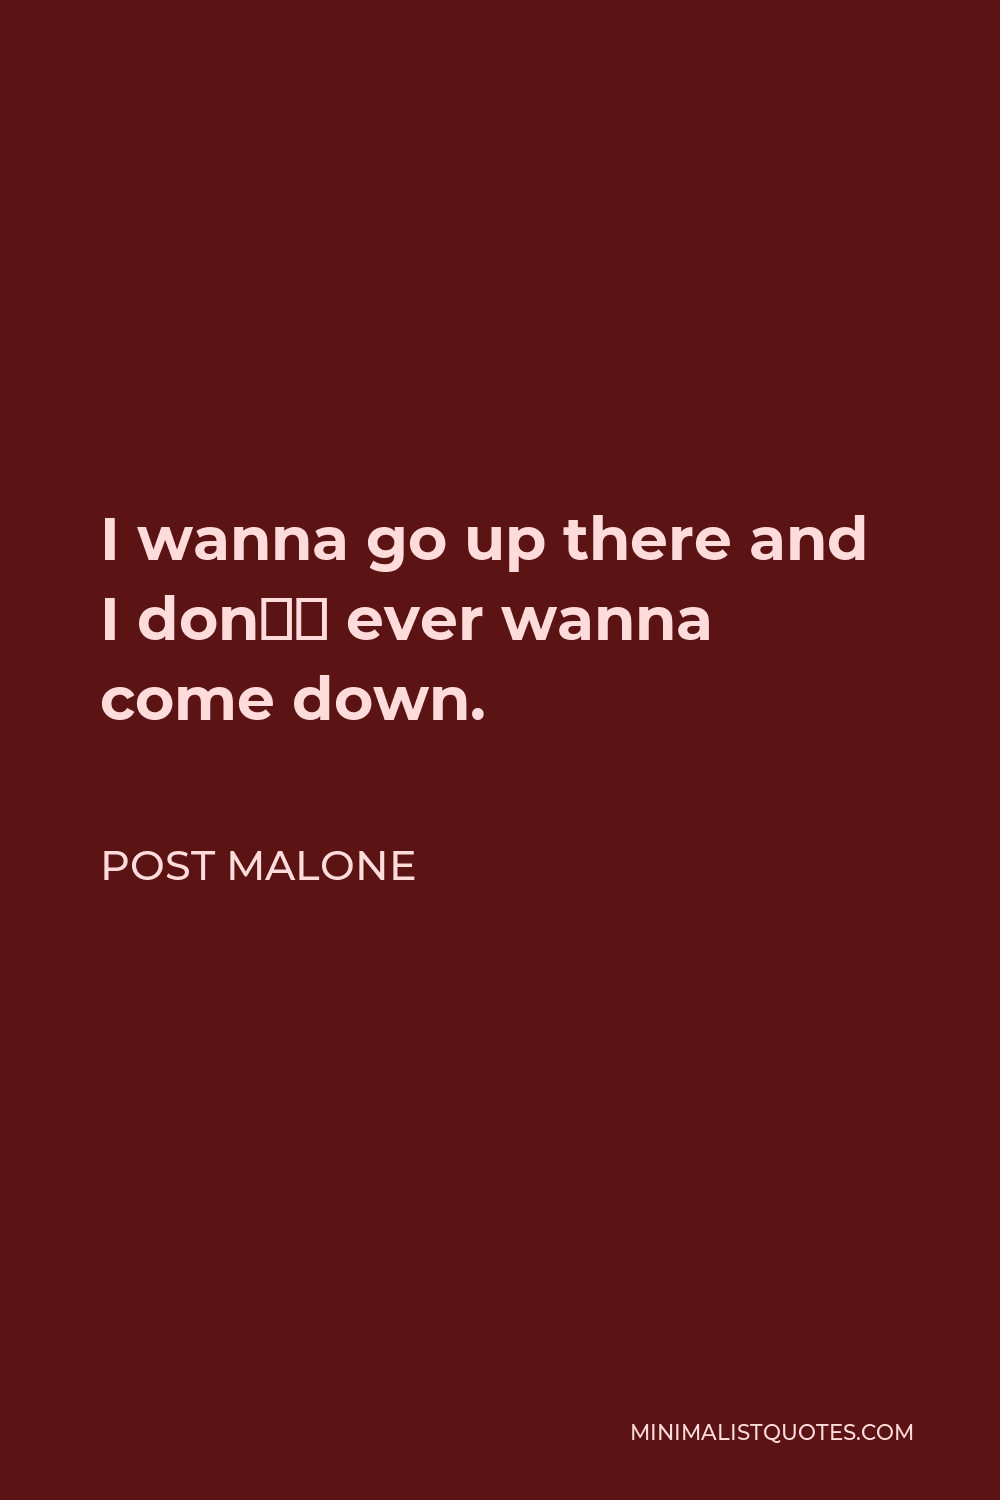 Post Malone Quote - I wanna go up there and I don’t ever wanna come down.